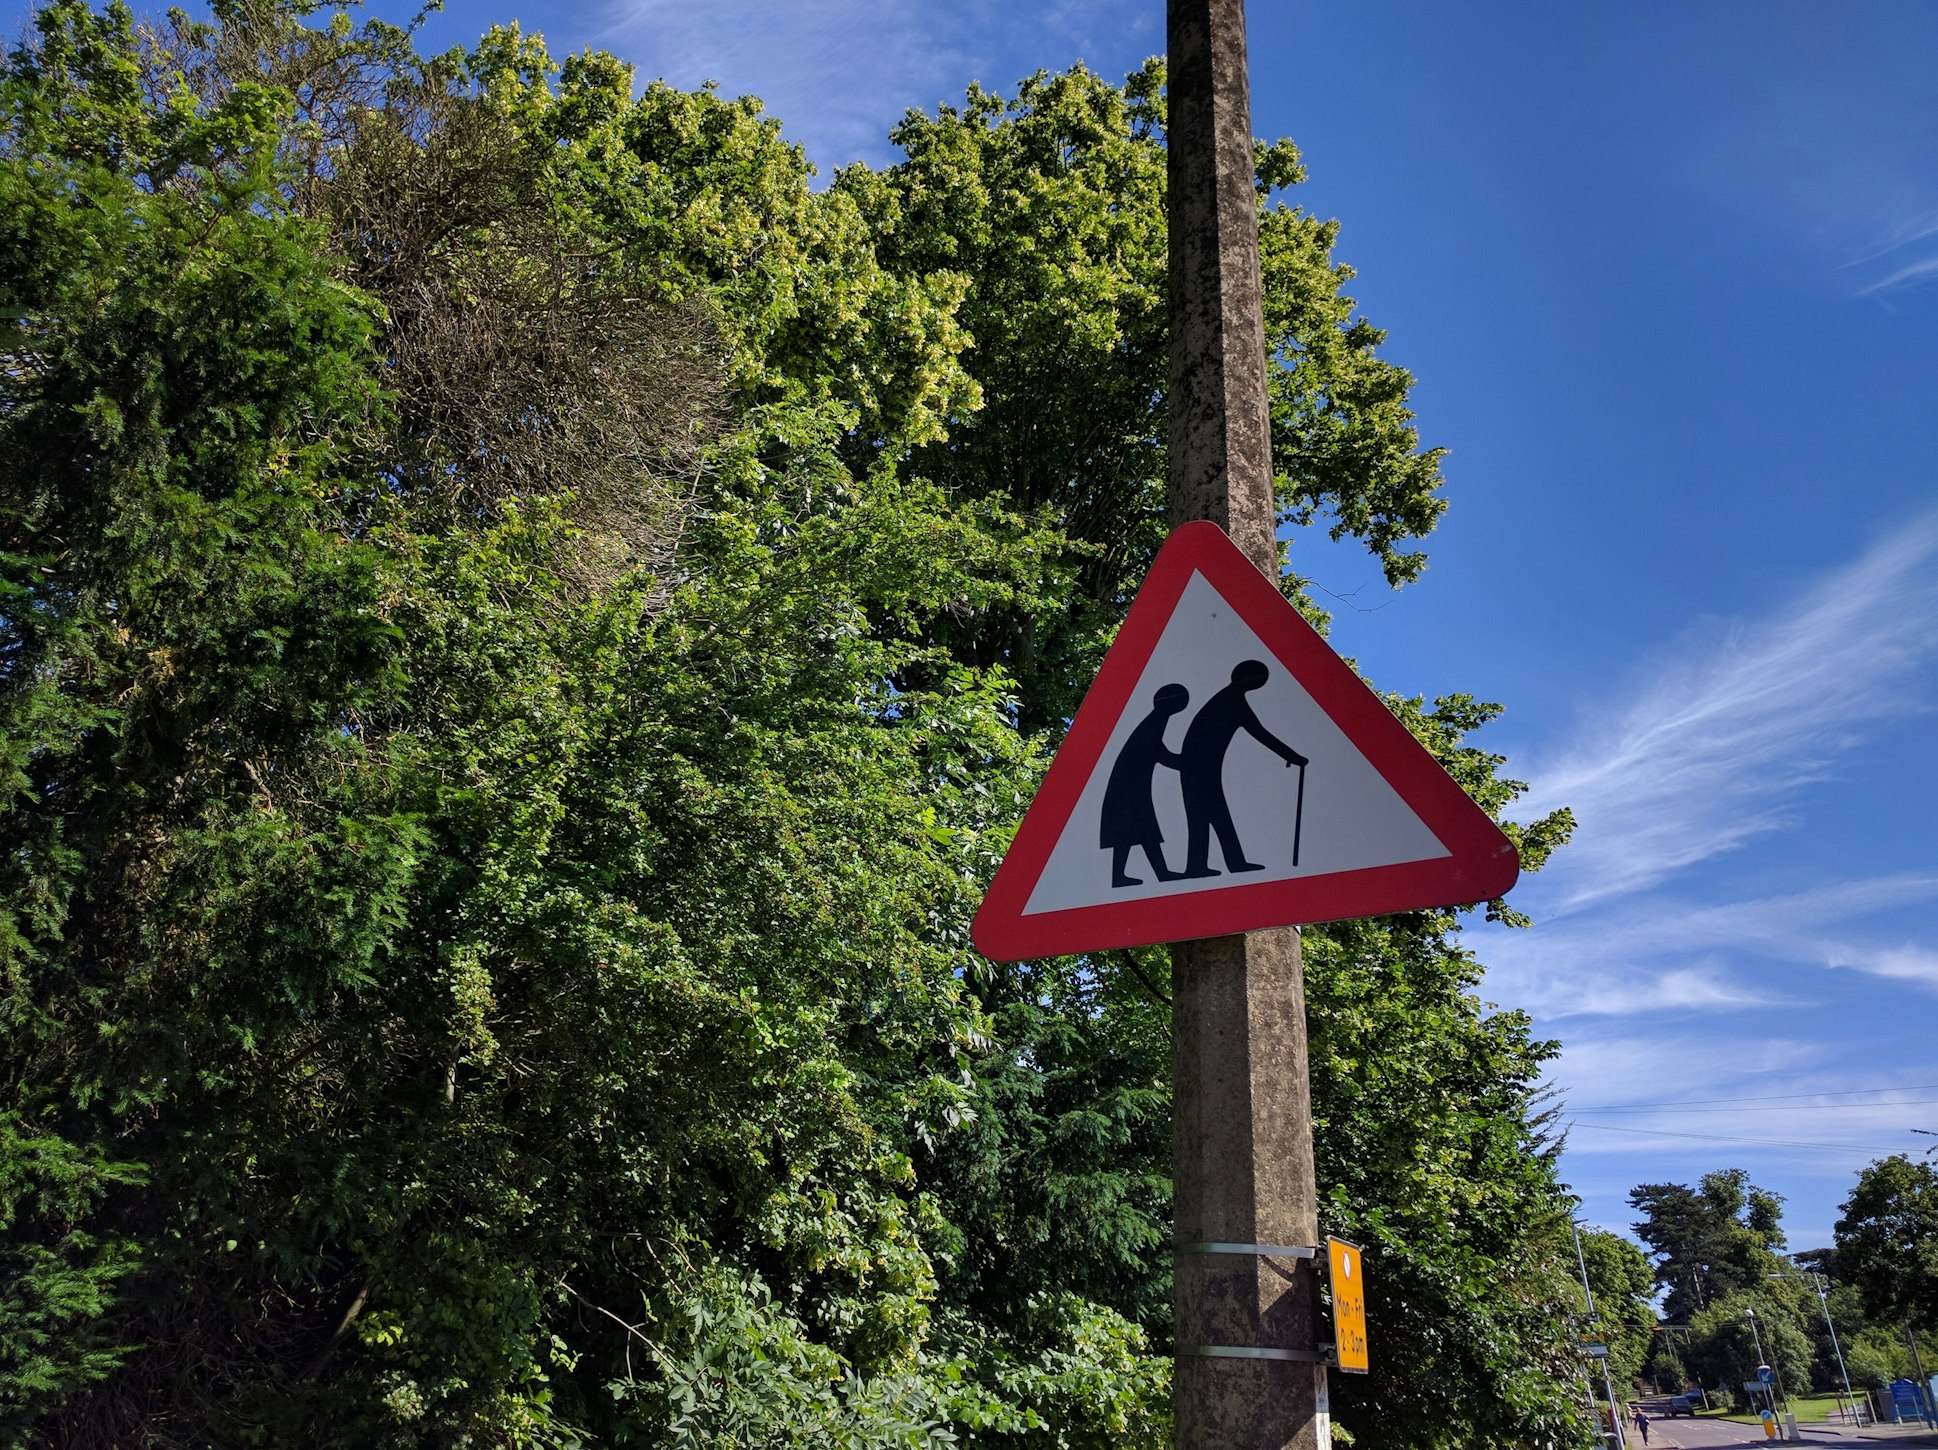 Bright sunny day with a suburbia street sign of "Please give way, elderly crossing" 